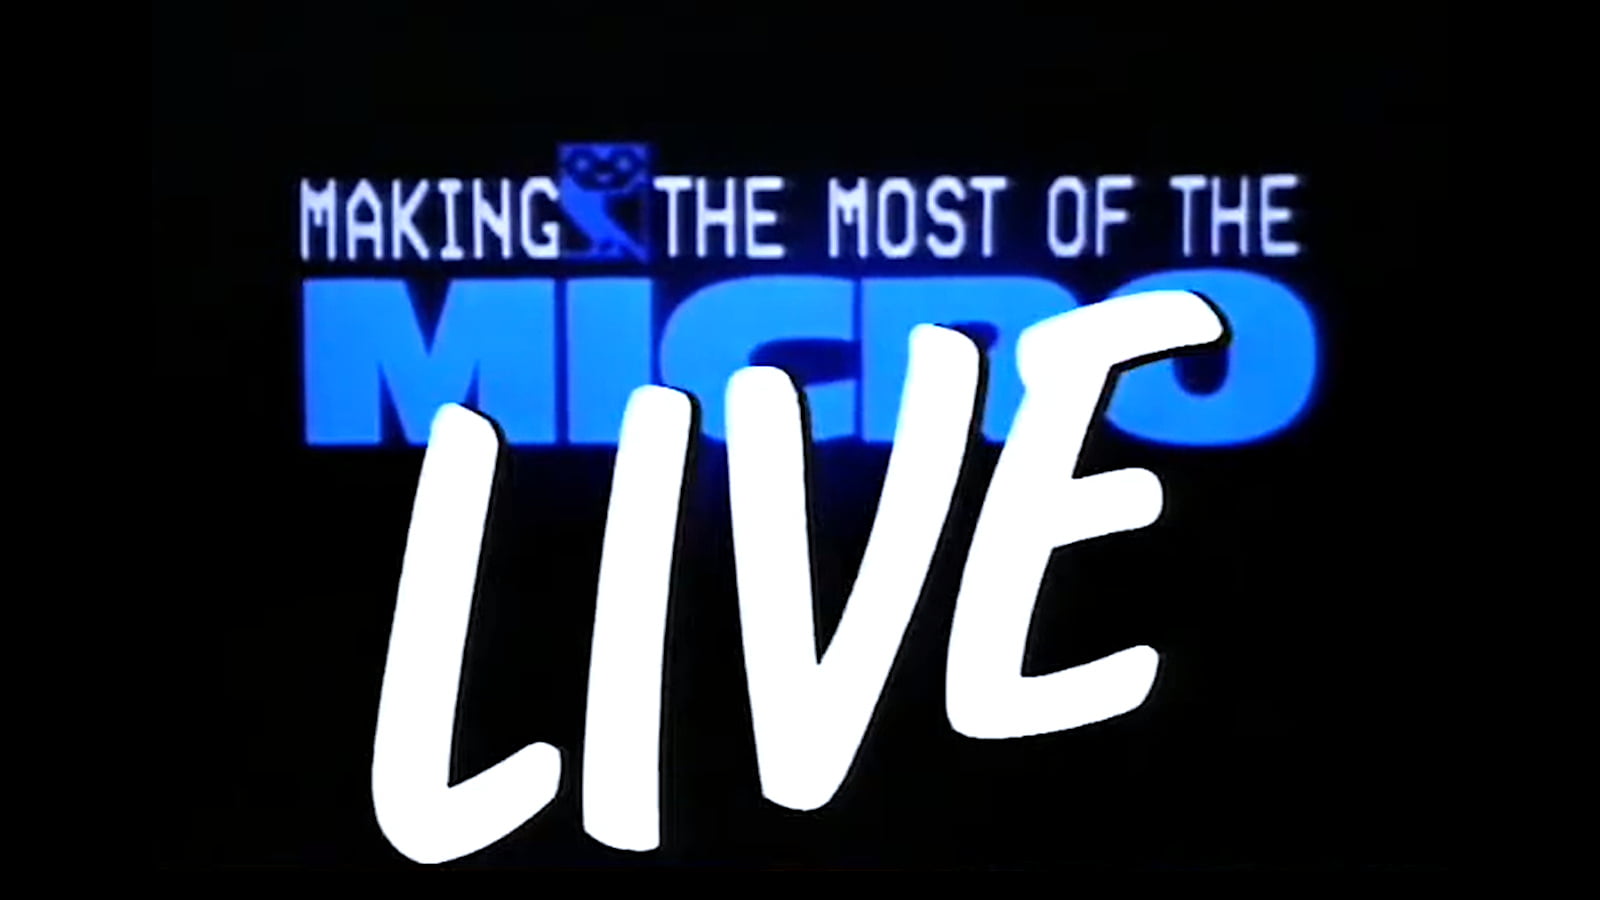 Opening title logo of BBC's Making the Most of the Micro Live, October 1983. A line of white computer text 'MAKING THE MOST OF THE' including the BBC Micro Owl mascot icon after the word Making, followed by a large MICRO in blue and overlaid with a handwritten style LIVE in white.